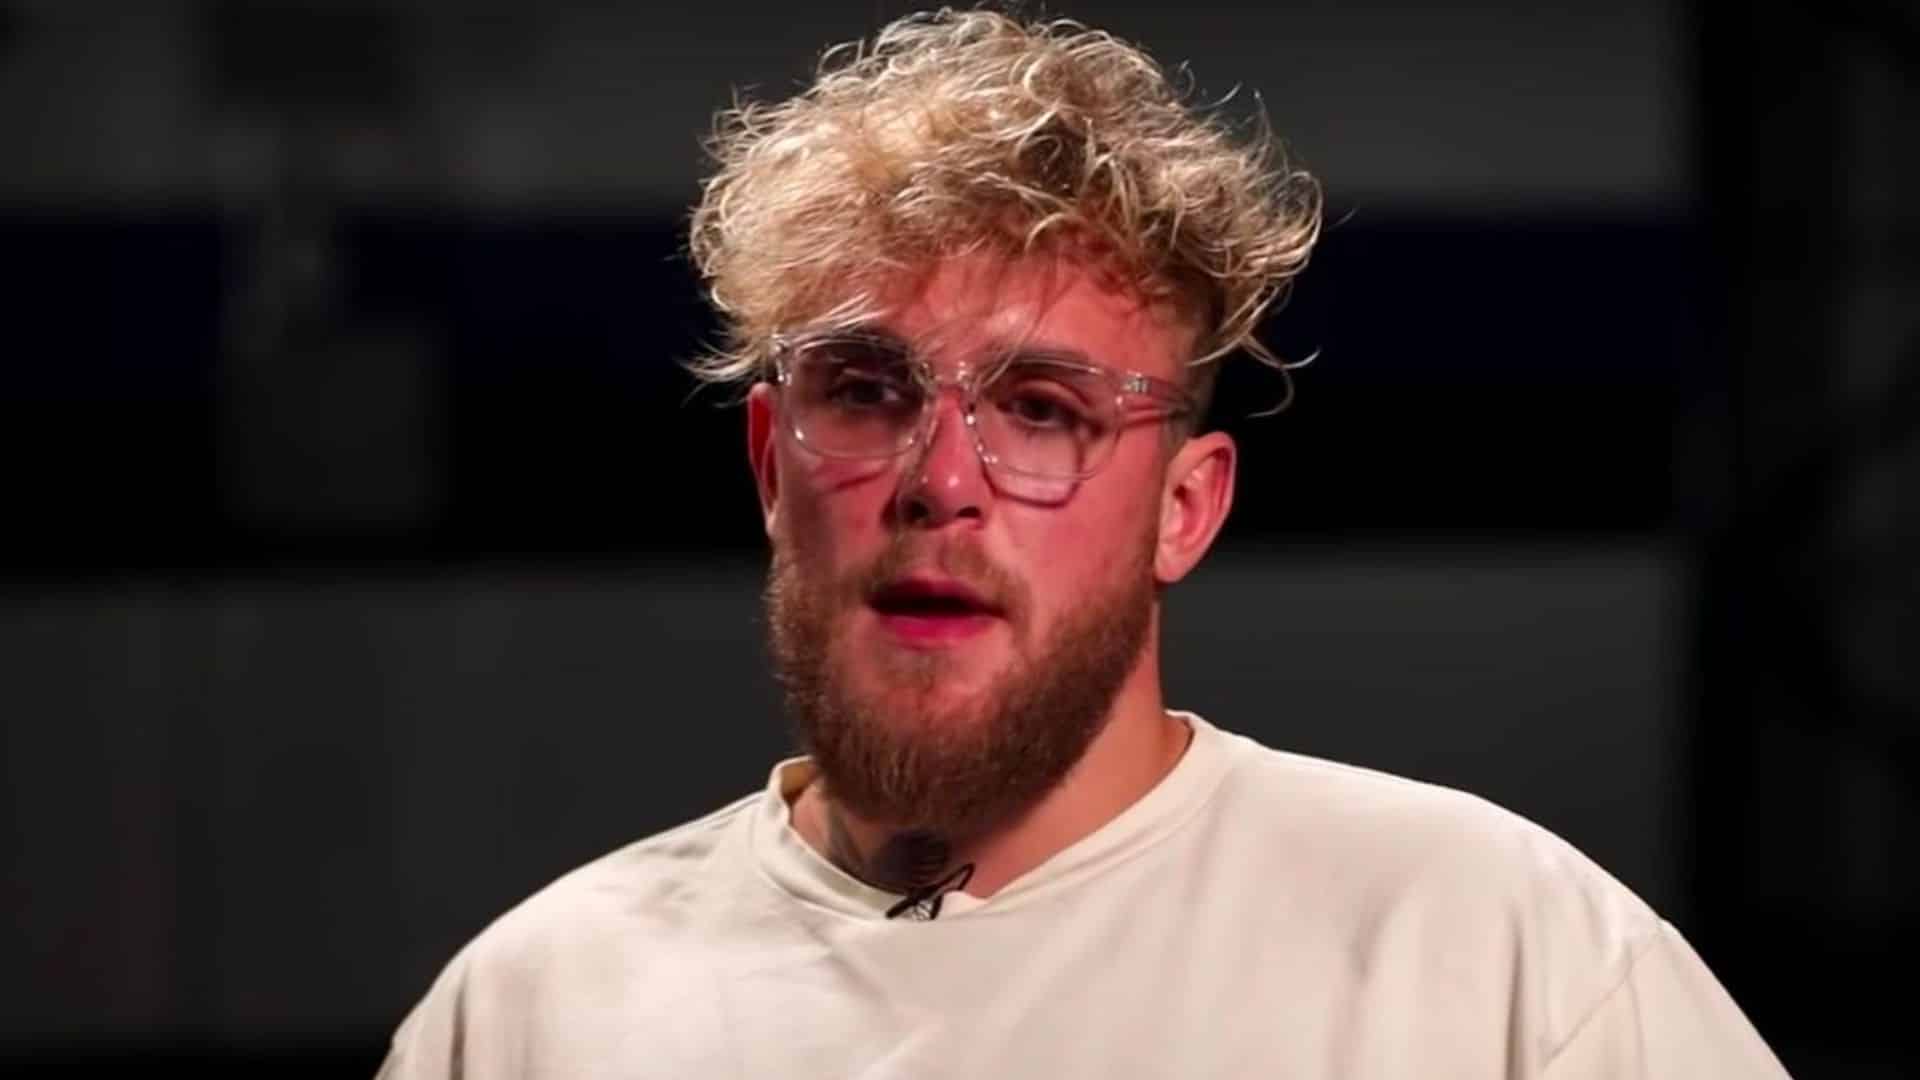 Jake Paul talking to camera in interview